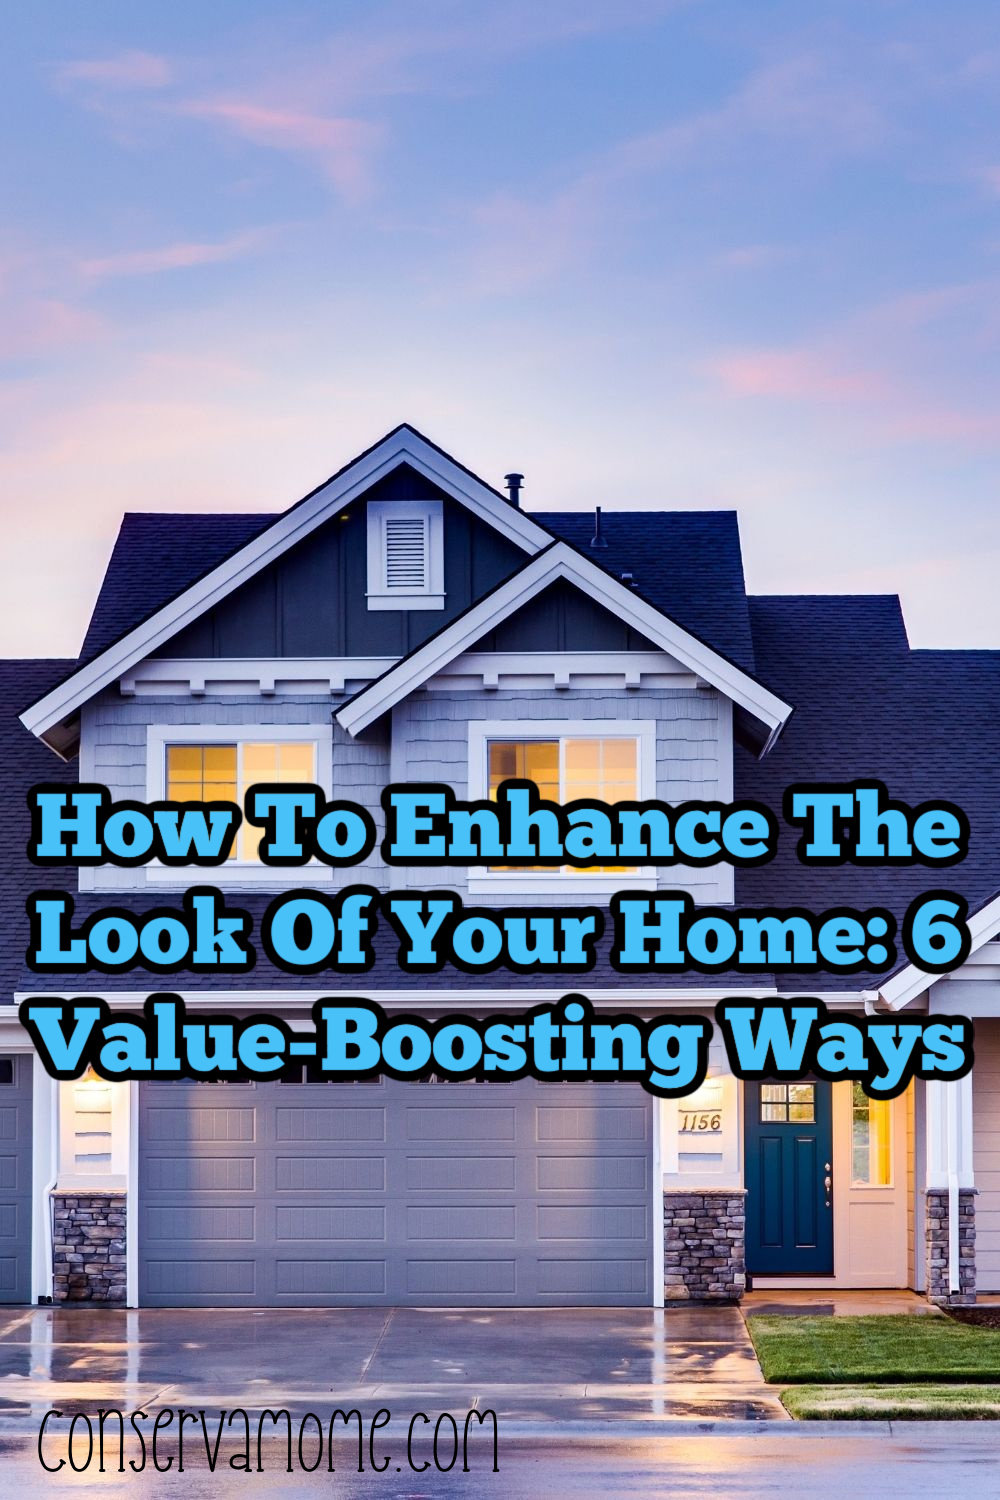 How To Enhance The Look Of Your Home: 6 Value-Boosting Ways